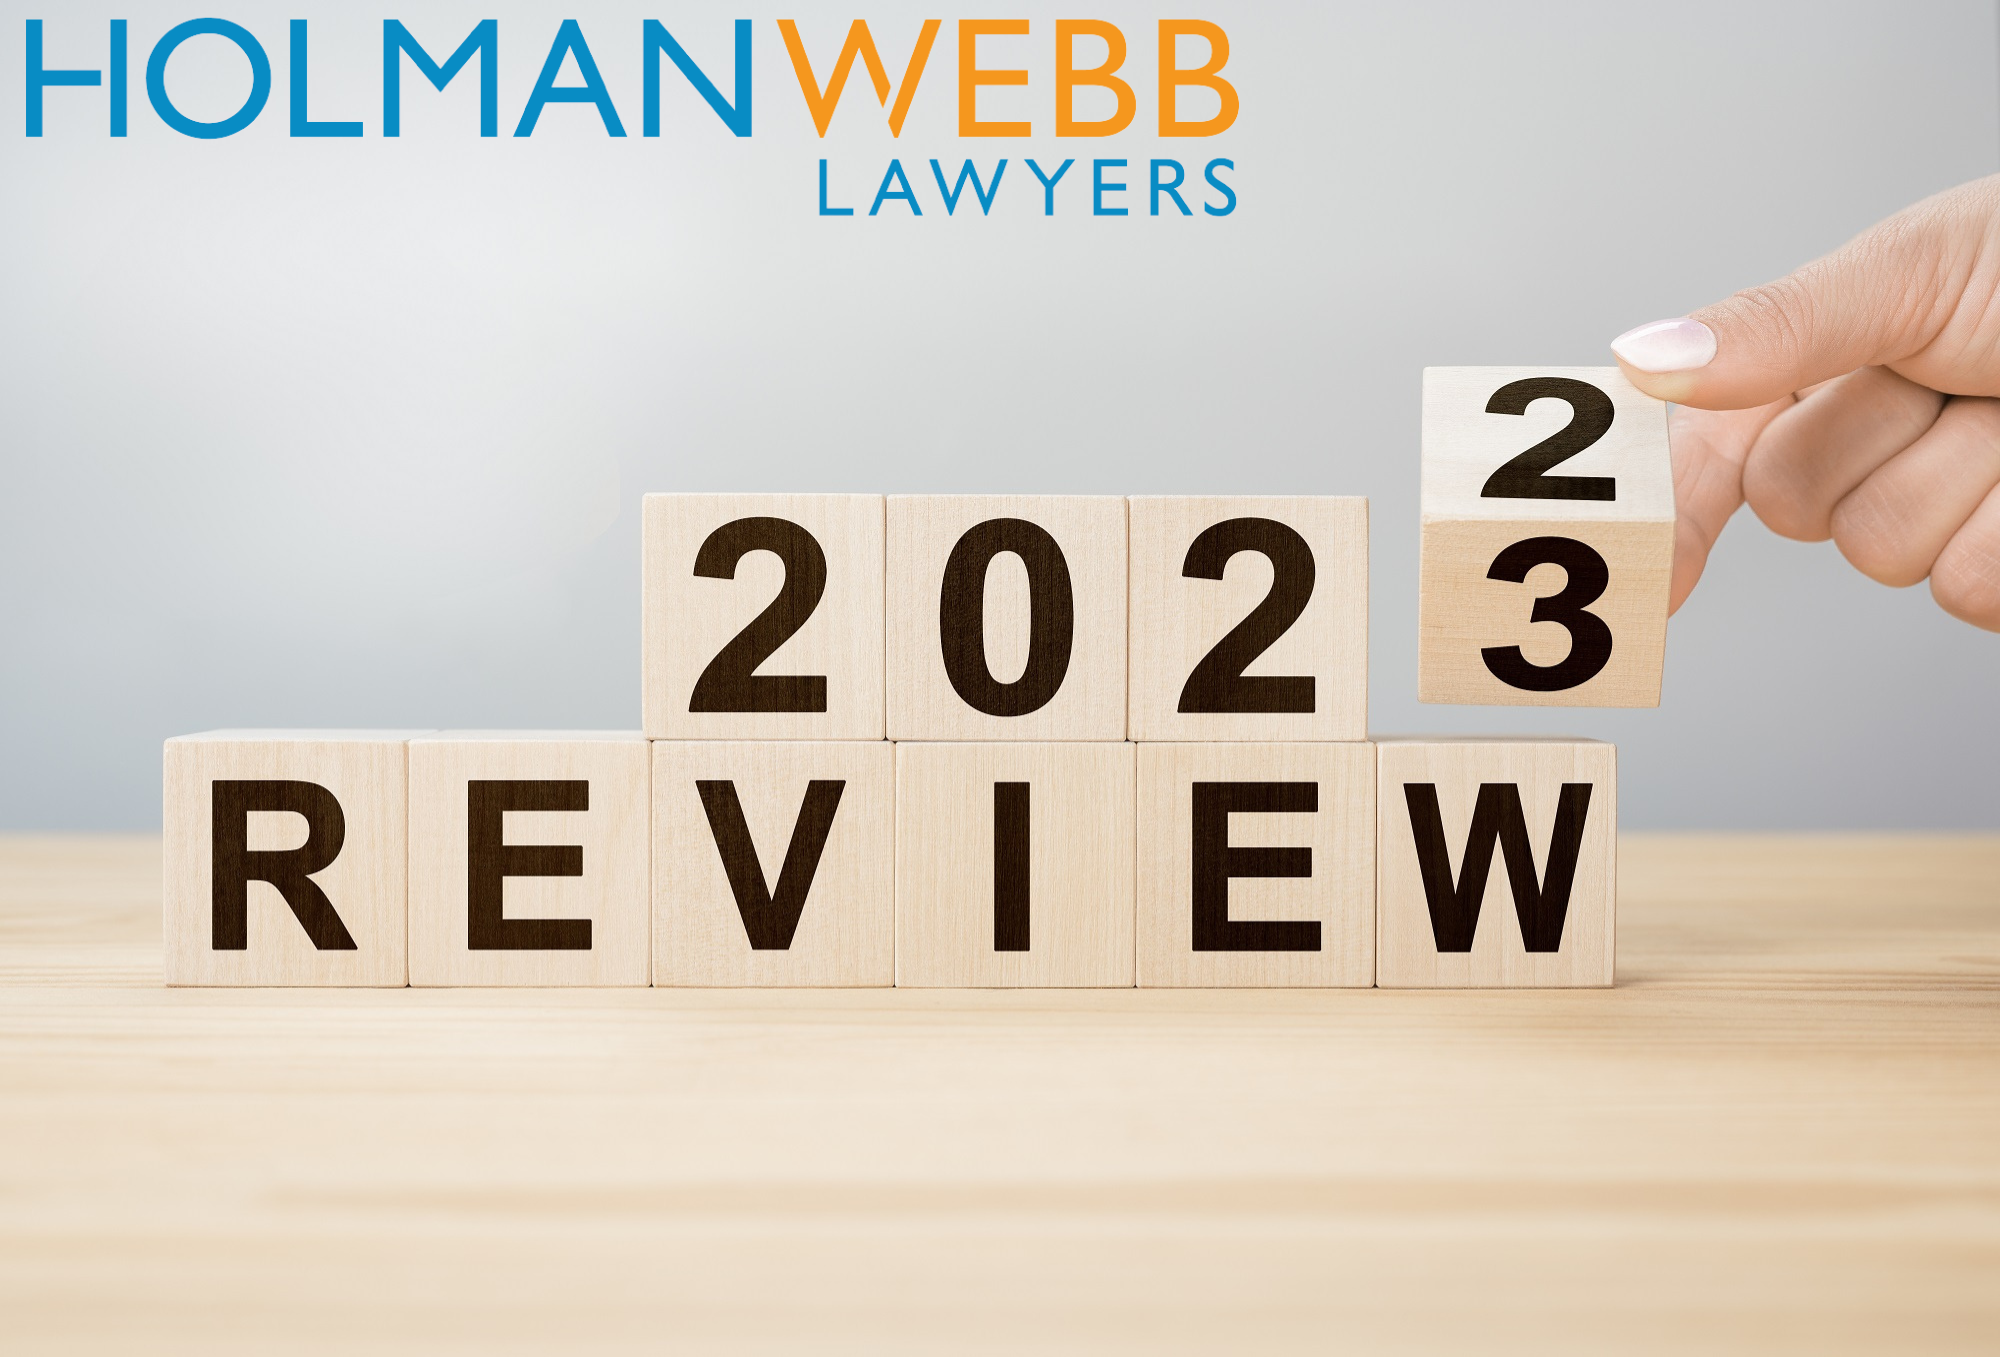 Upcoming Insurance Webinar: 2022 - A Year in Review (Thursday 2 March)